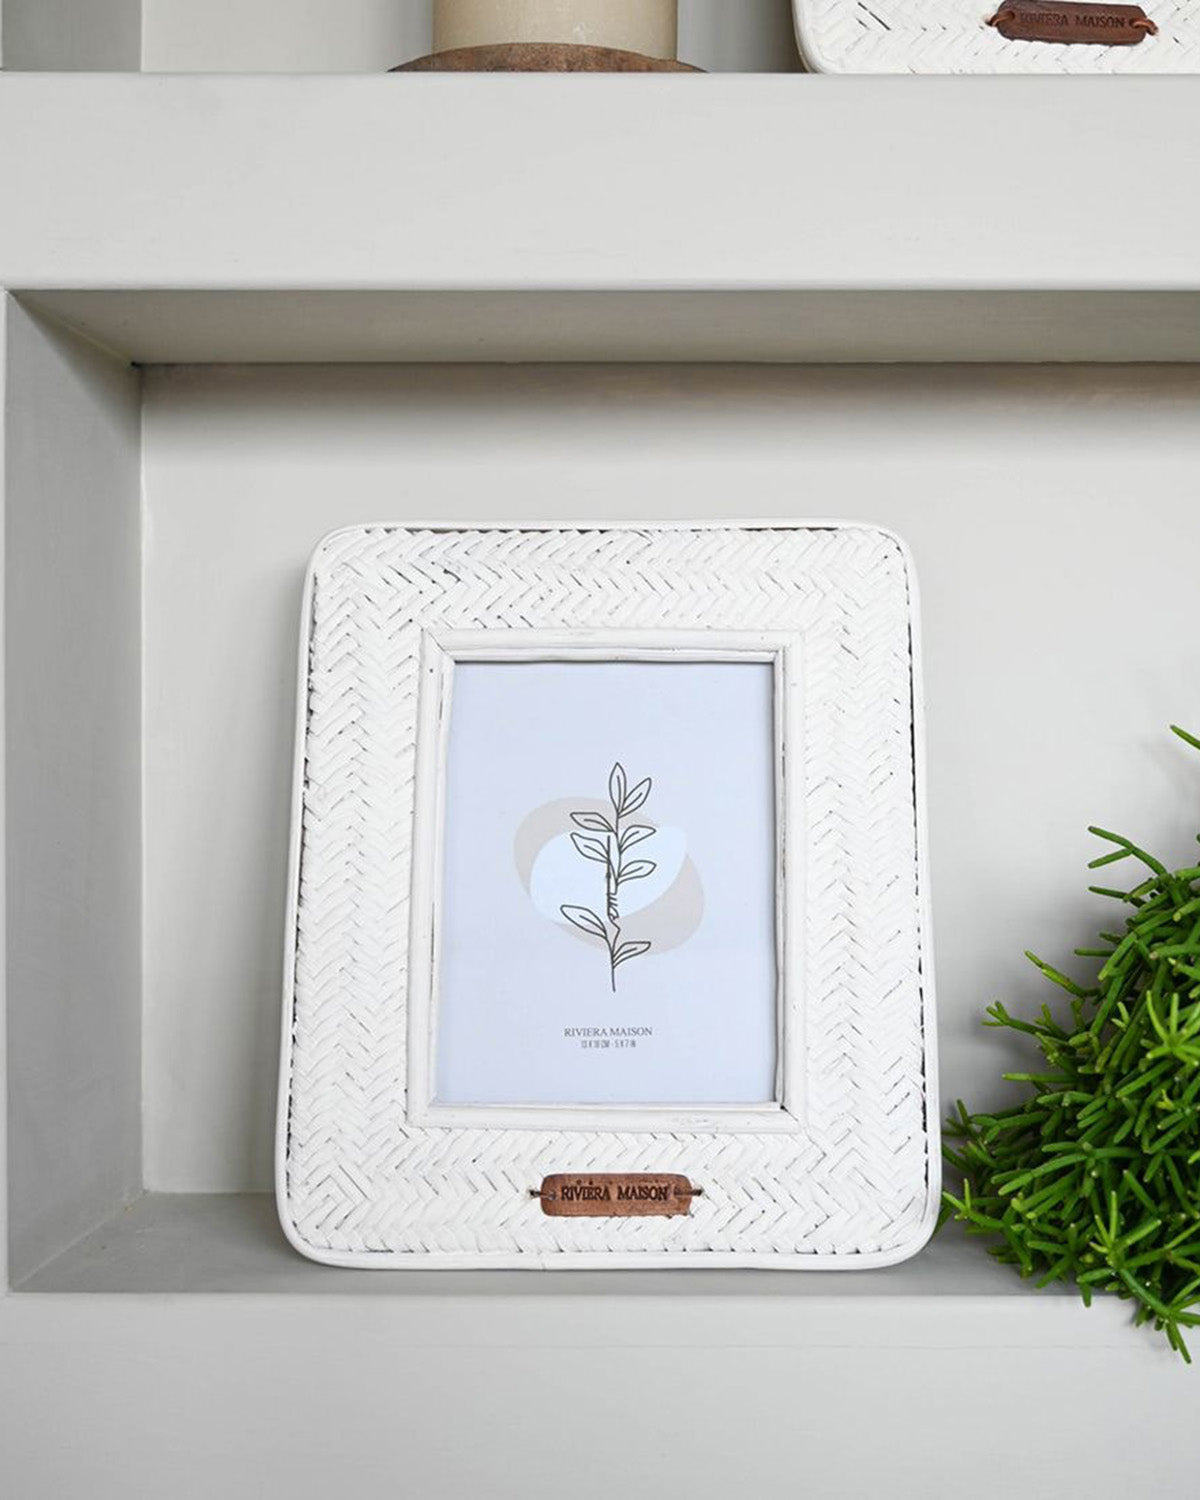 BRAIDED PHOTO FRAME in color WHITE  made of rustic rattan in a braided pattern